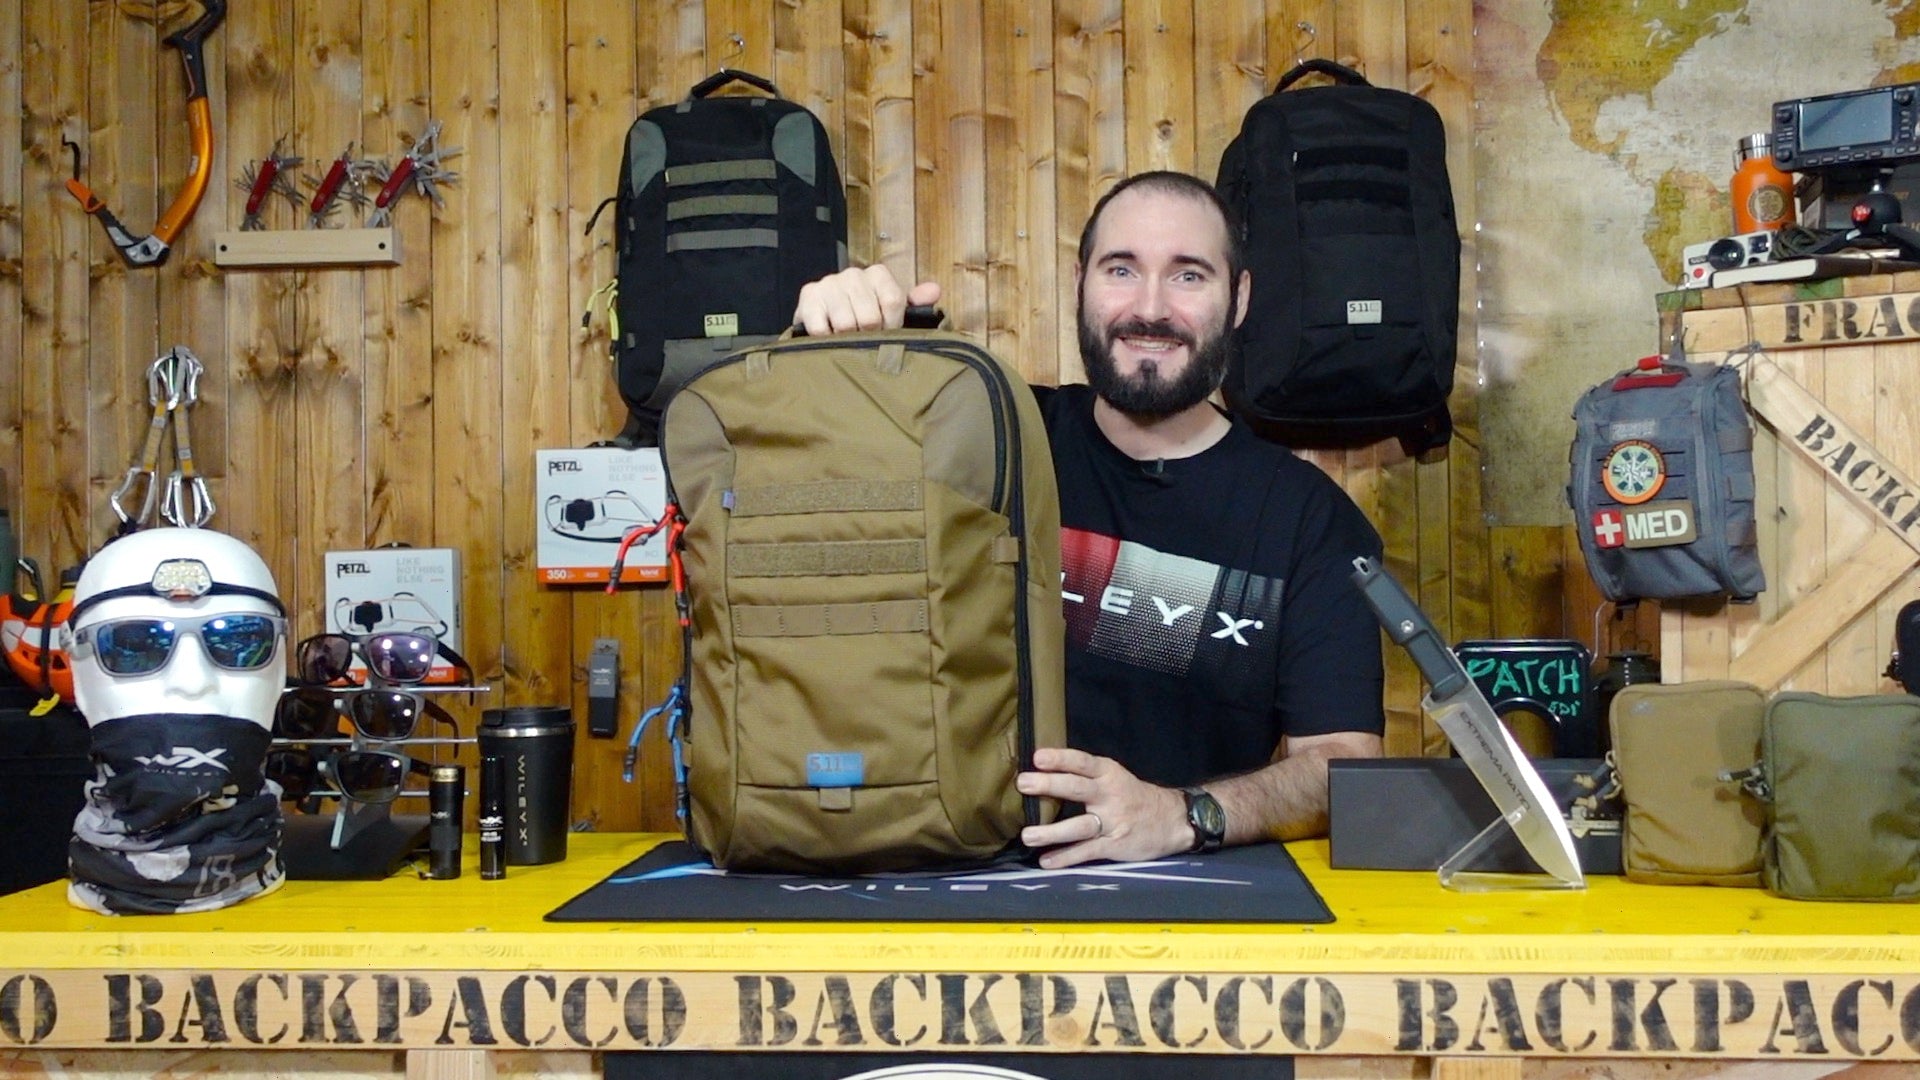 Paolo di Backpacco spiega il 5.11 | PT-R GYM BACKPACK